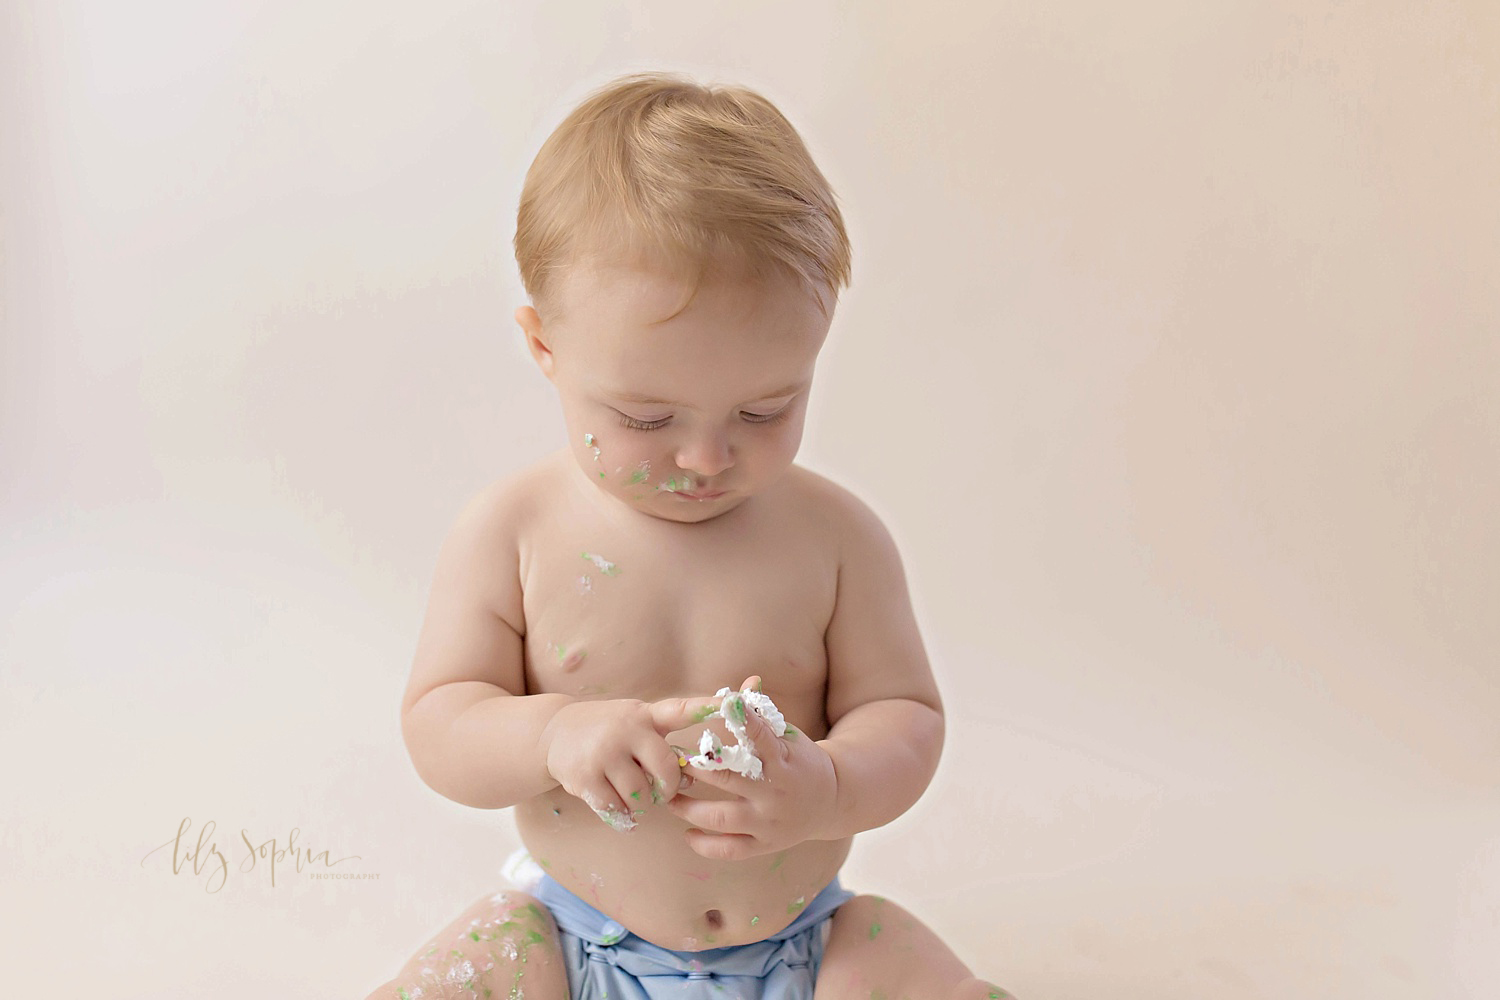  Image of a one year old, baby, boy, wearing a blue, cloth, diaper, with icing all over his face and hands, looking down at the icing on his fingers.&nbsp; 